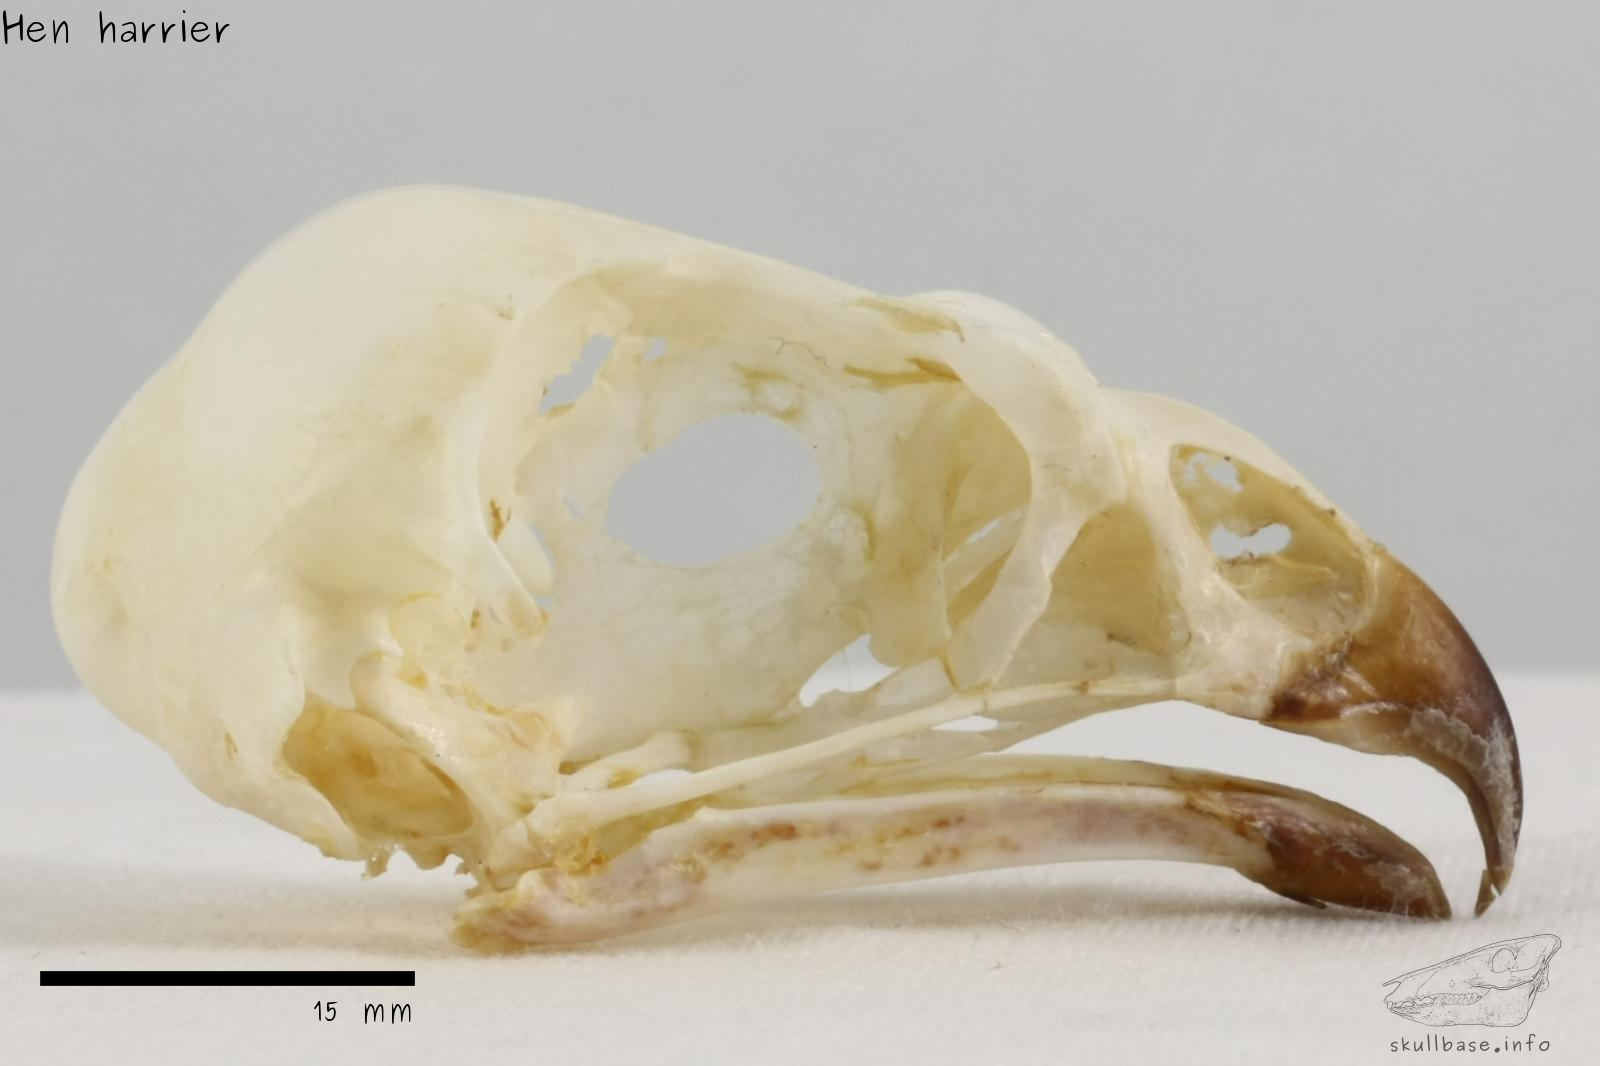 Hen harrier (Circus cyaneus) skull lateral view